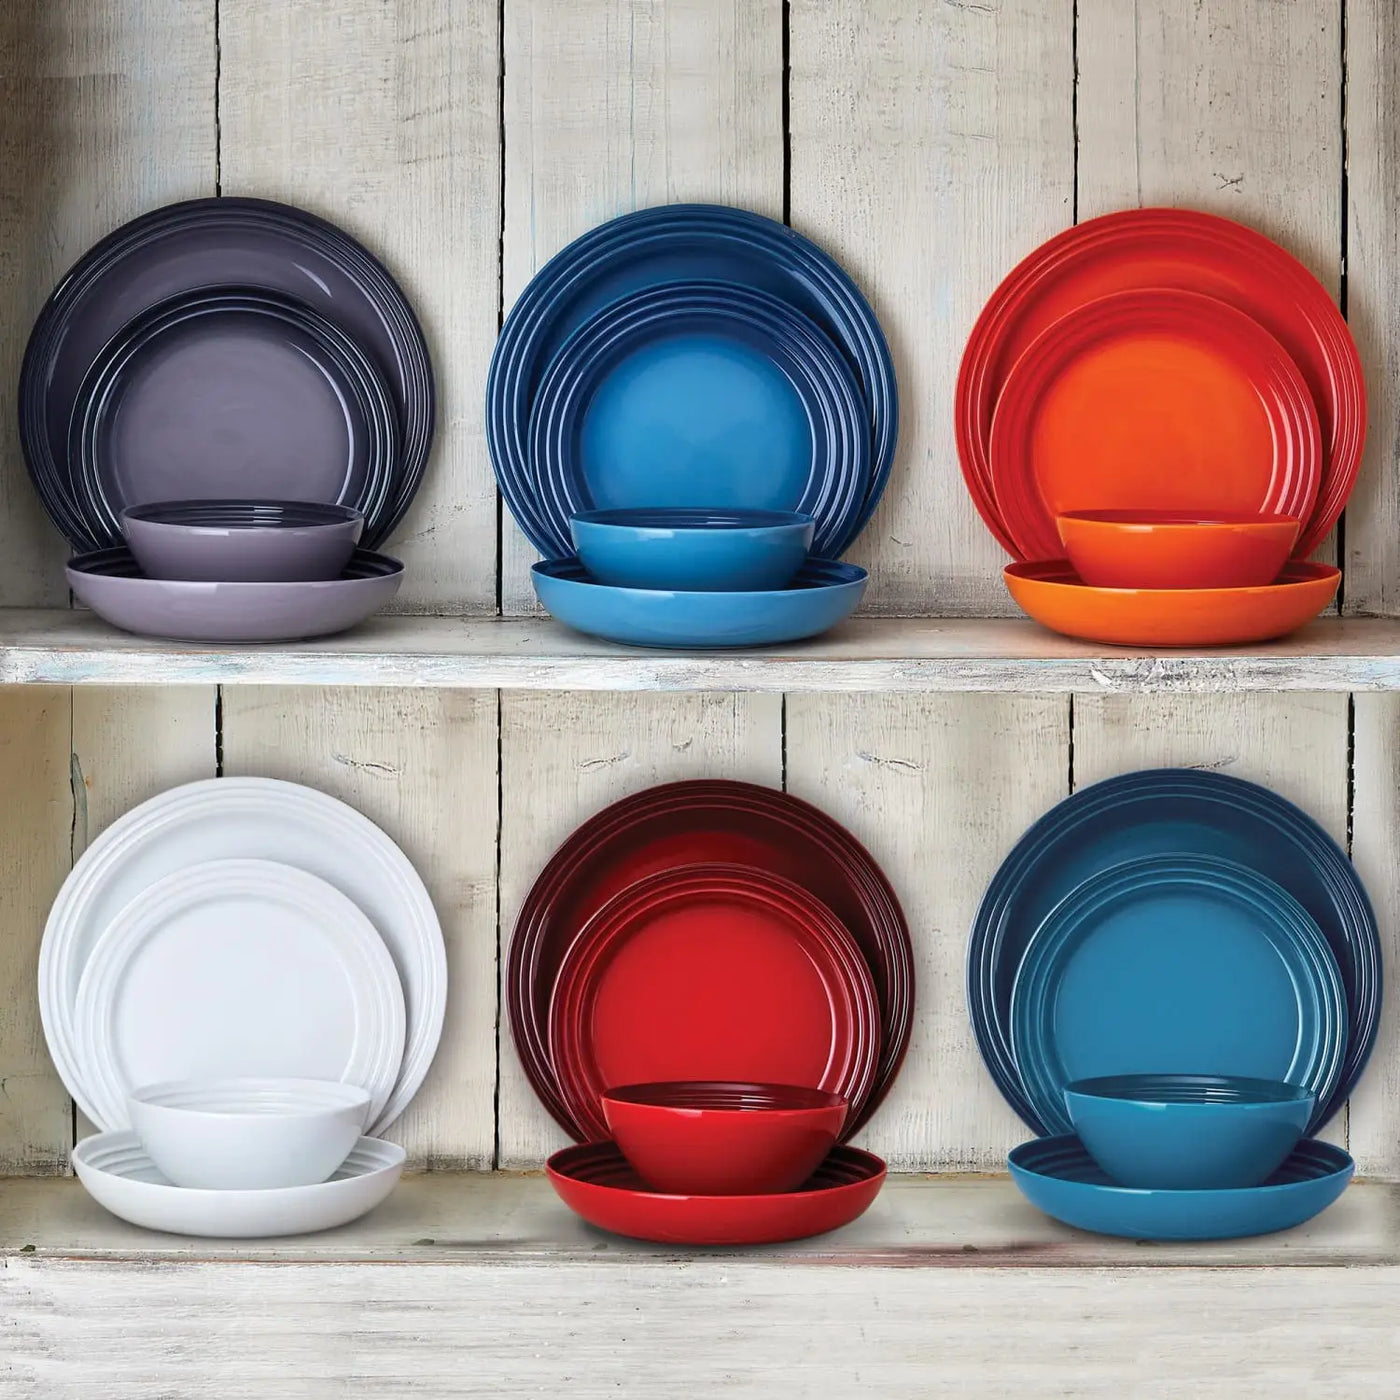 Le Creuset Stoneware Plates in Volcanic, Cerise, Teal, Flint and white